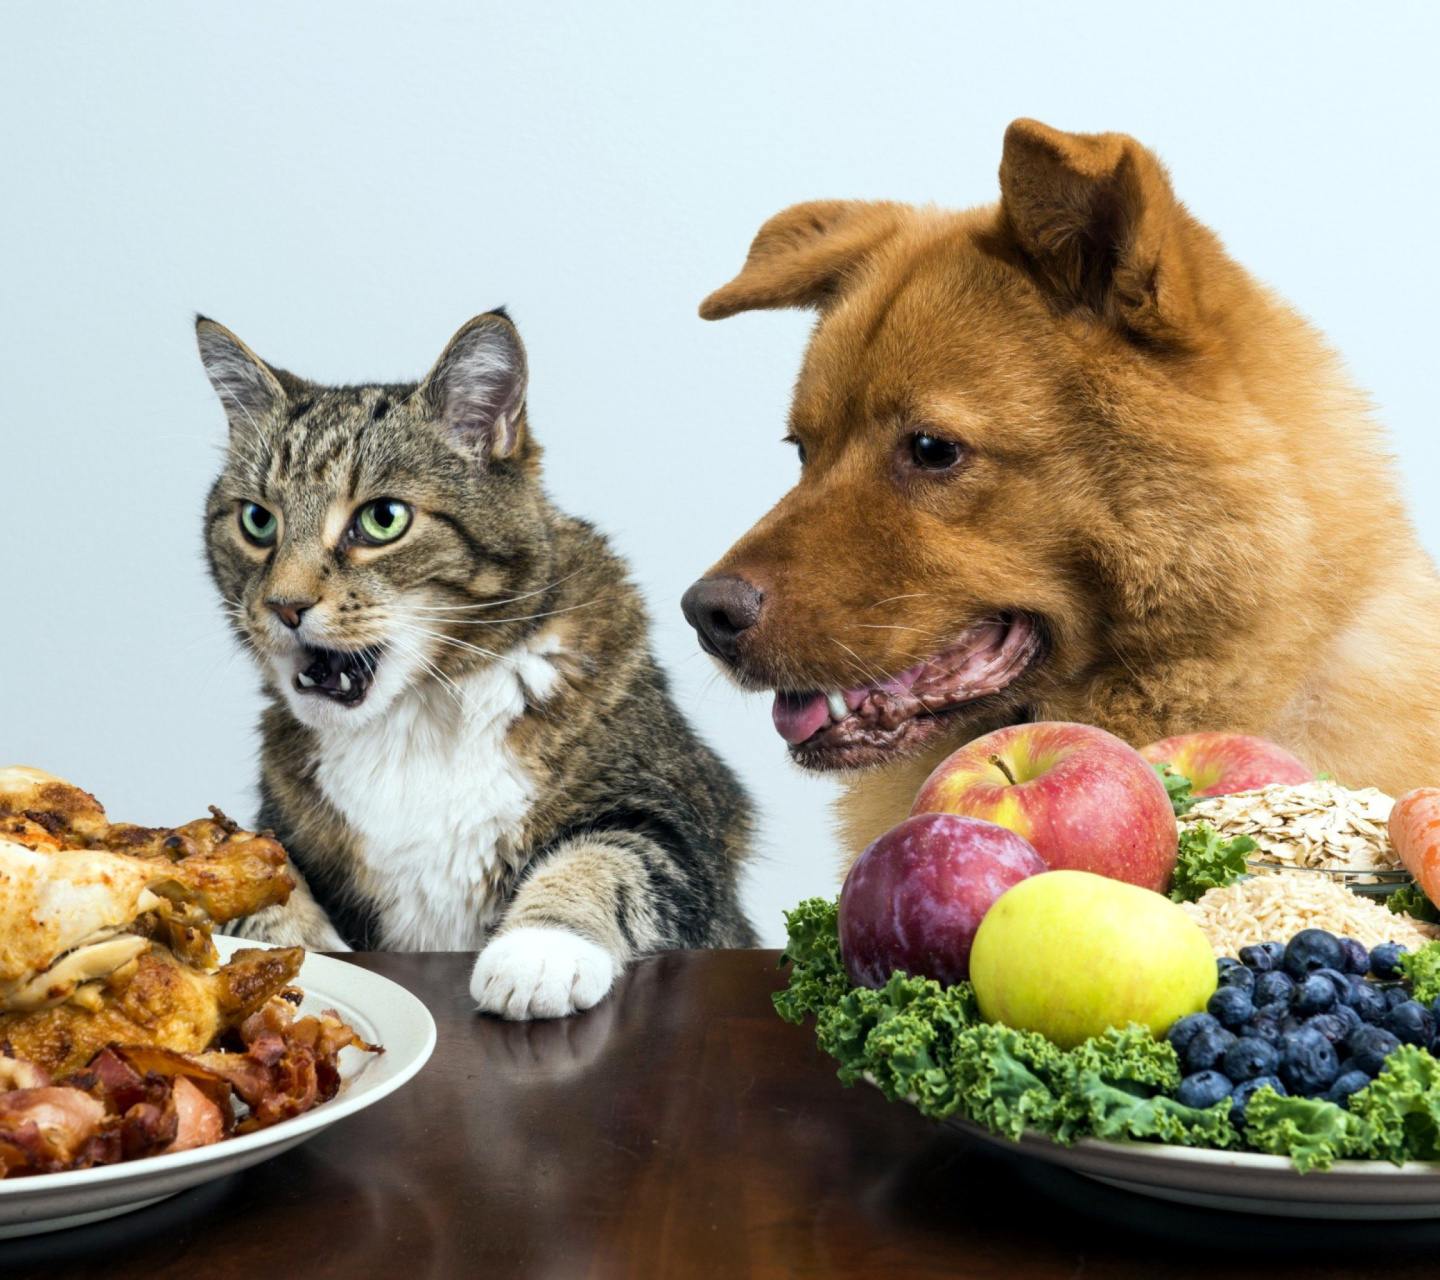 Dog and Cat Dinner wallpaper 1440x1280